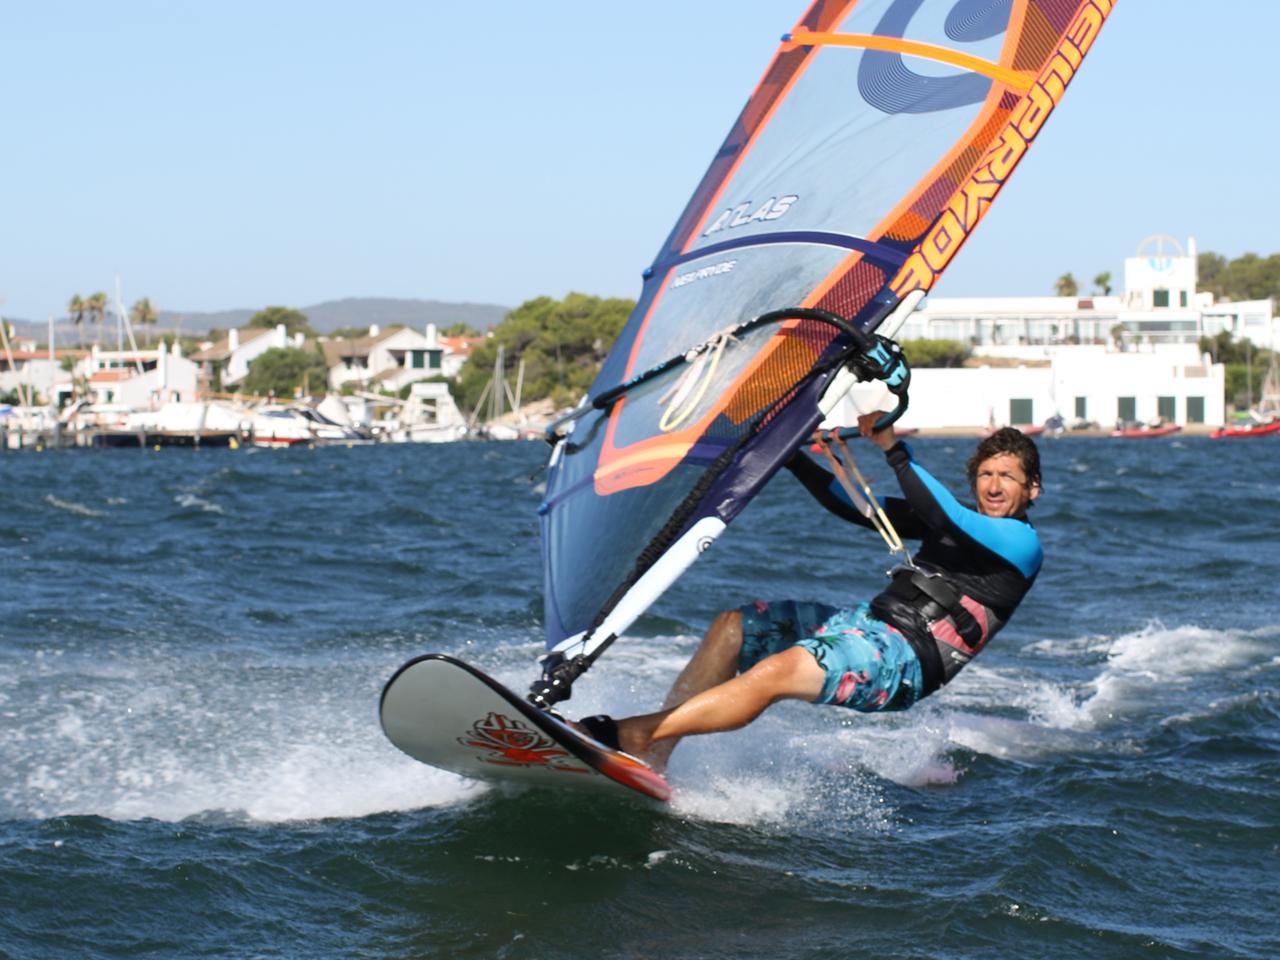 Intermediate Windsurfing Groups and tuition